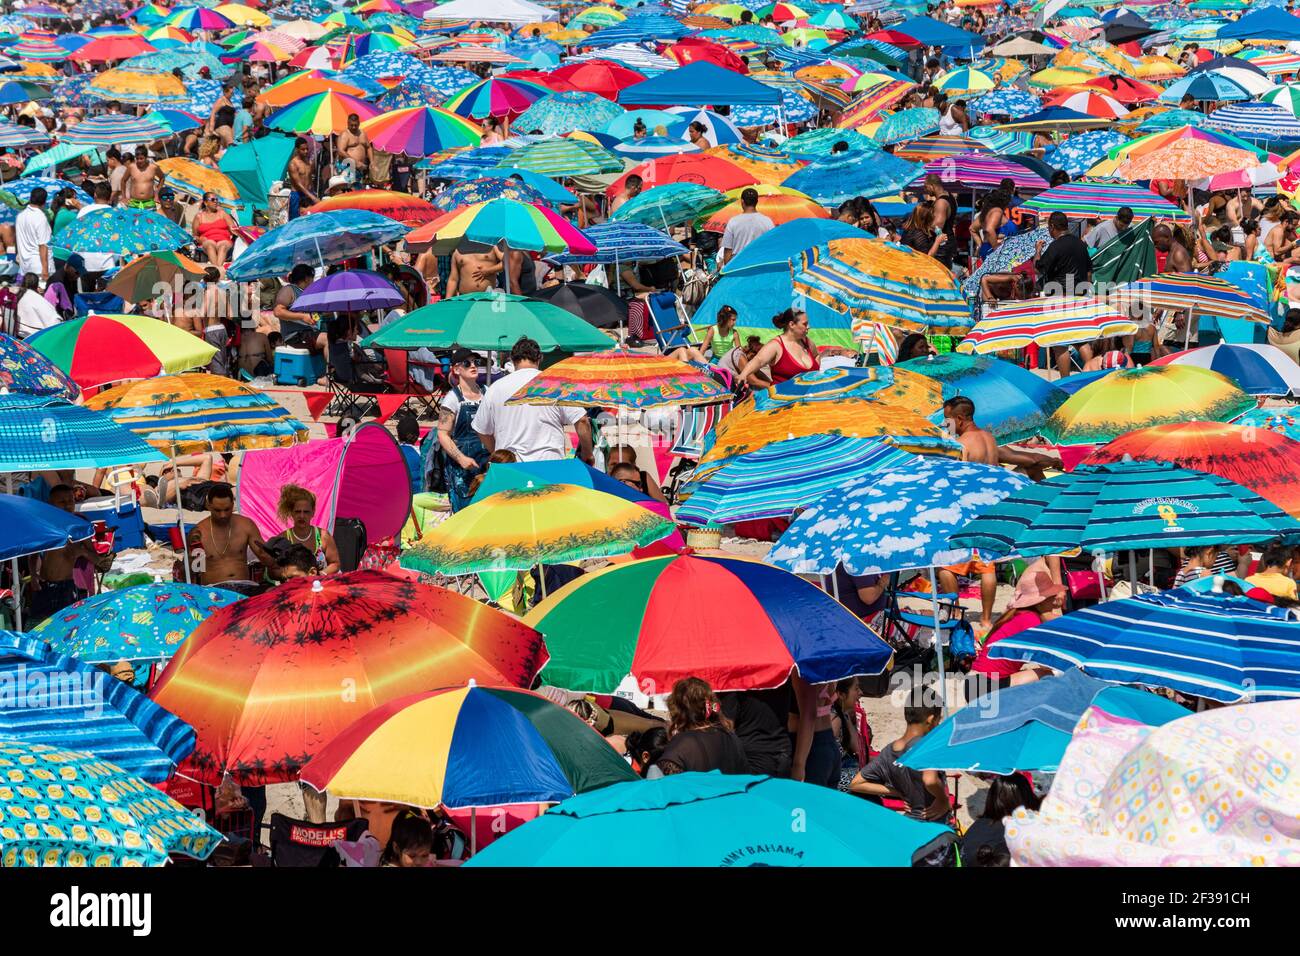 Endless swarms of people and their beach umbrellas pack the shore at Coney Island on July 4th, 2017. Stock Photo